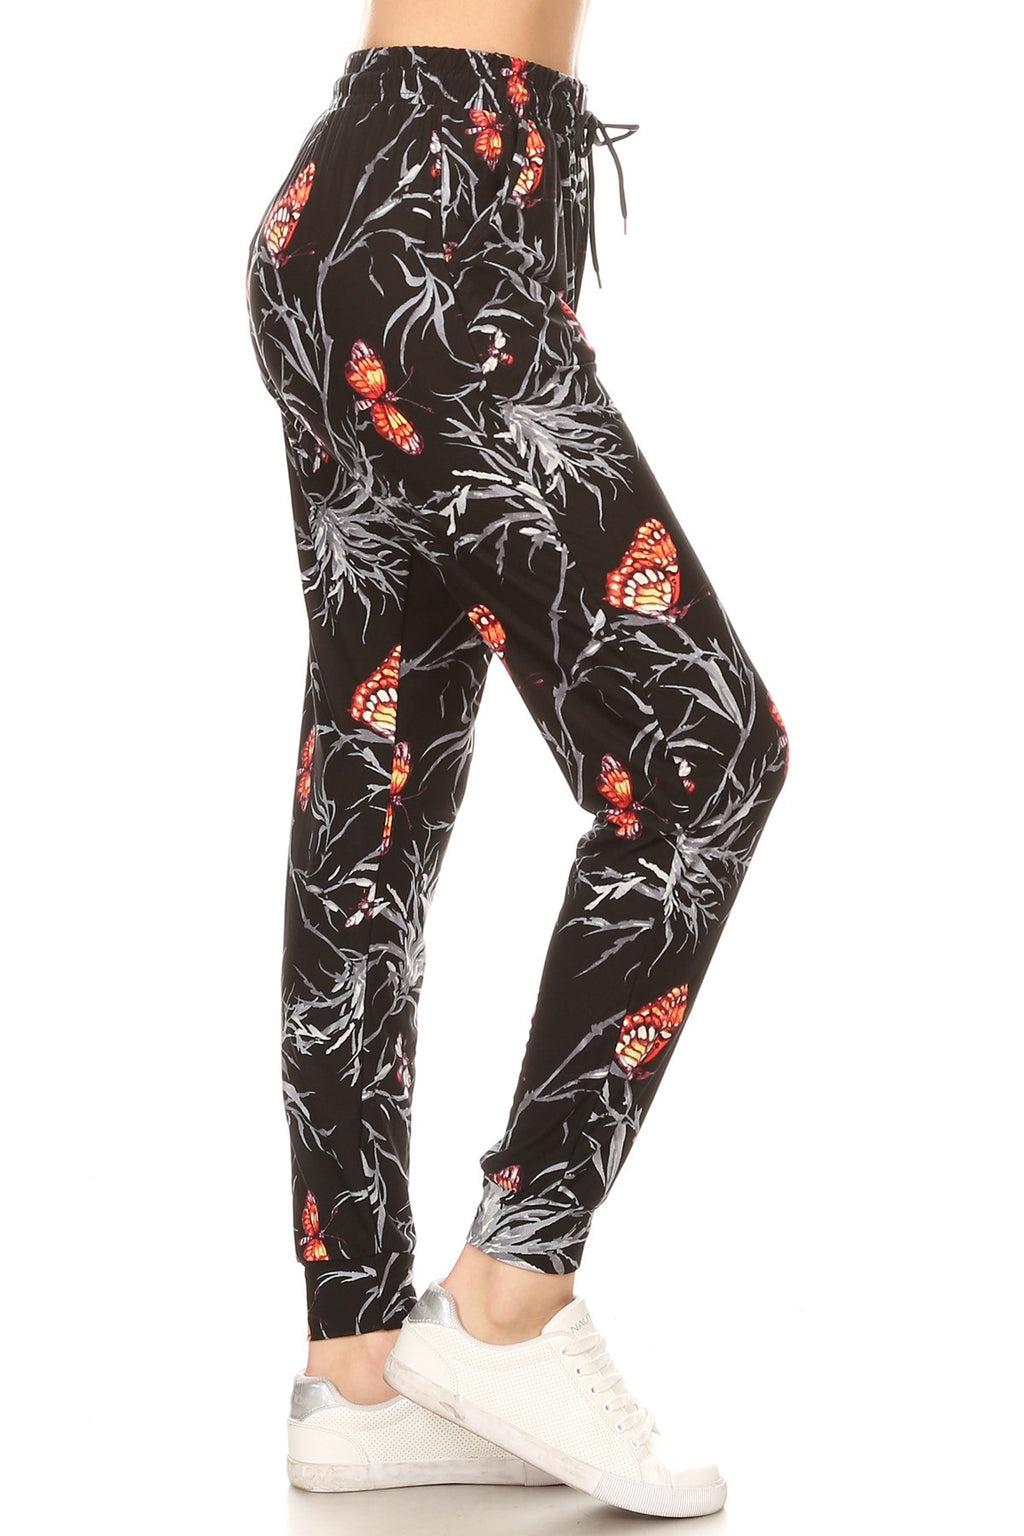 FLORAL BUTTERFLY printed joggers with solid trim, drawstring waistband, waist pockets, and cuffed hems